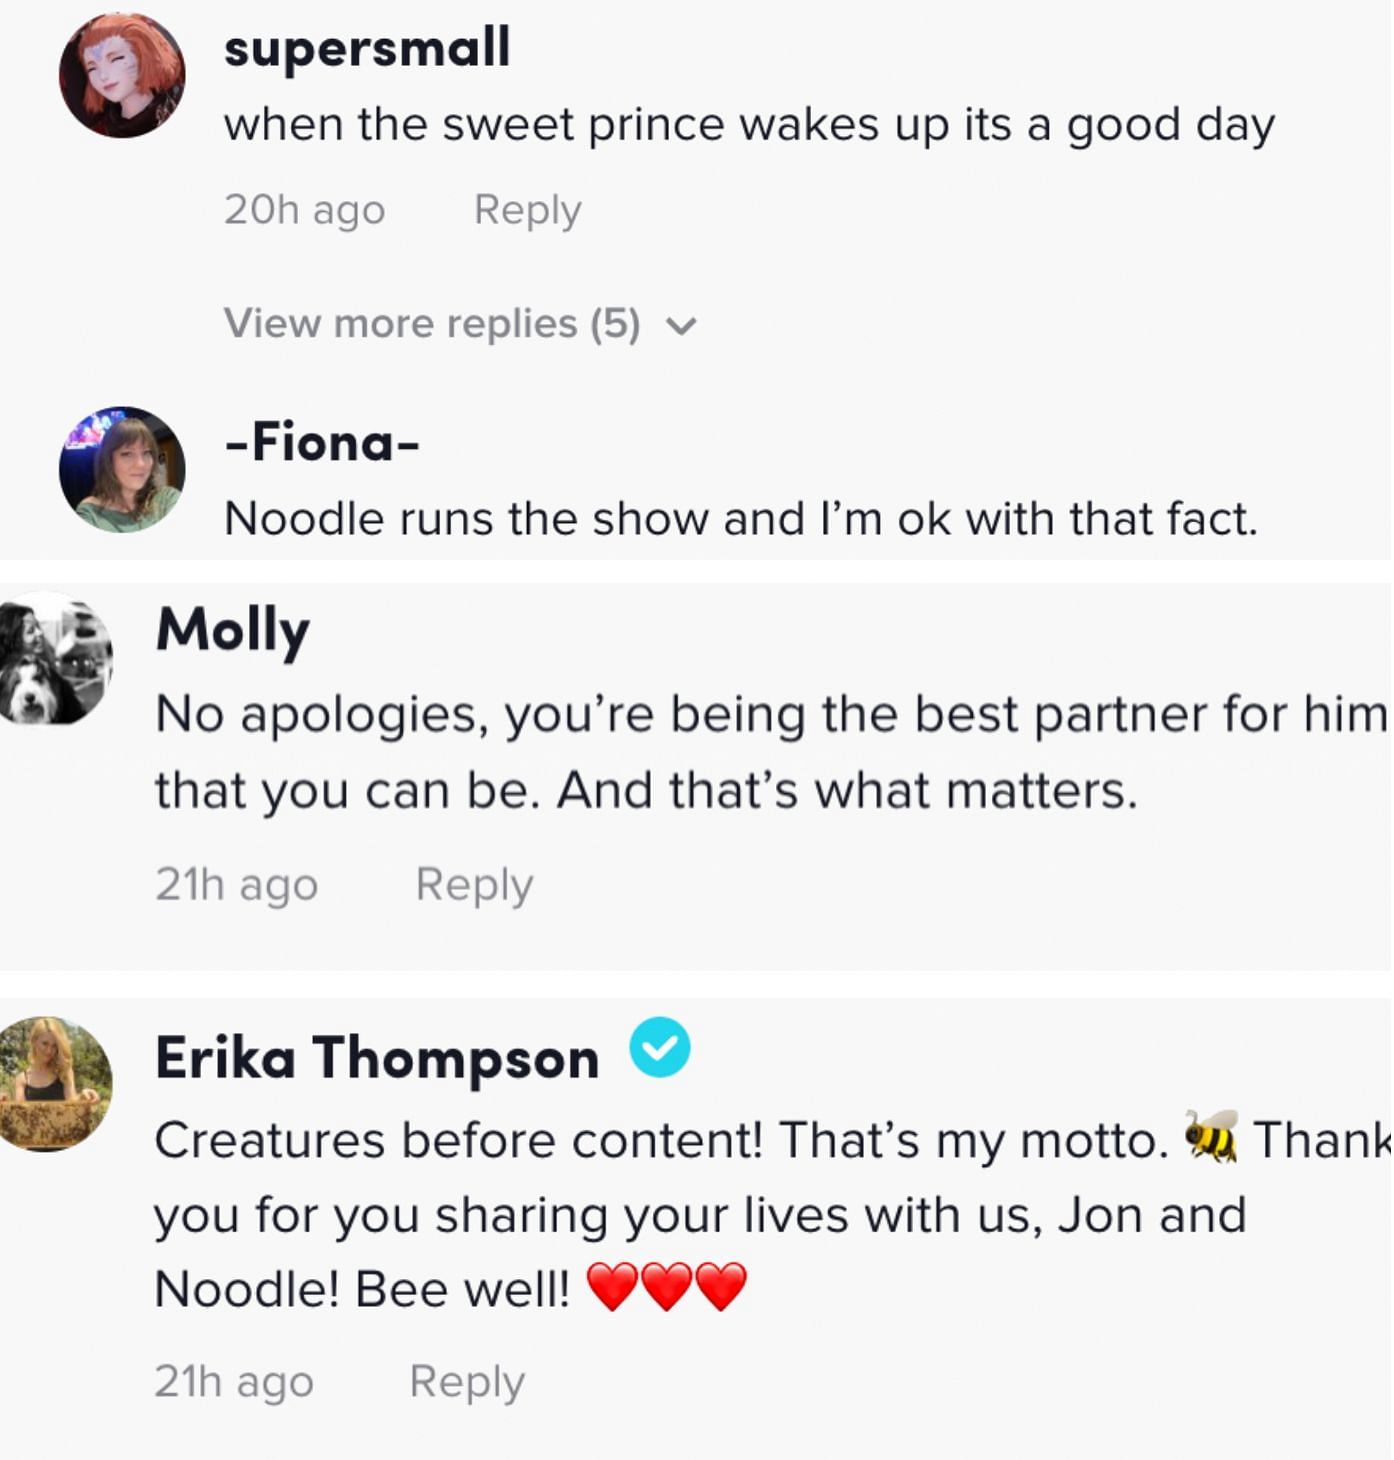 TikTokers shower their love on Noodle the Pug, and pray for his wellbeing. (Image via TikTok)